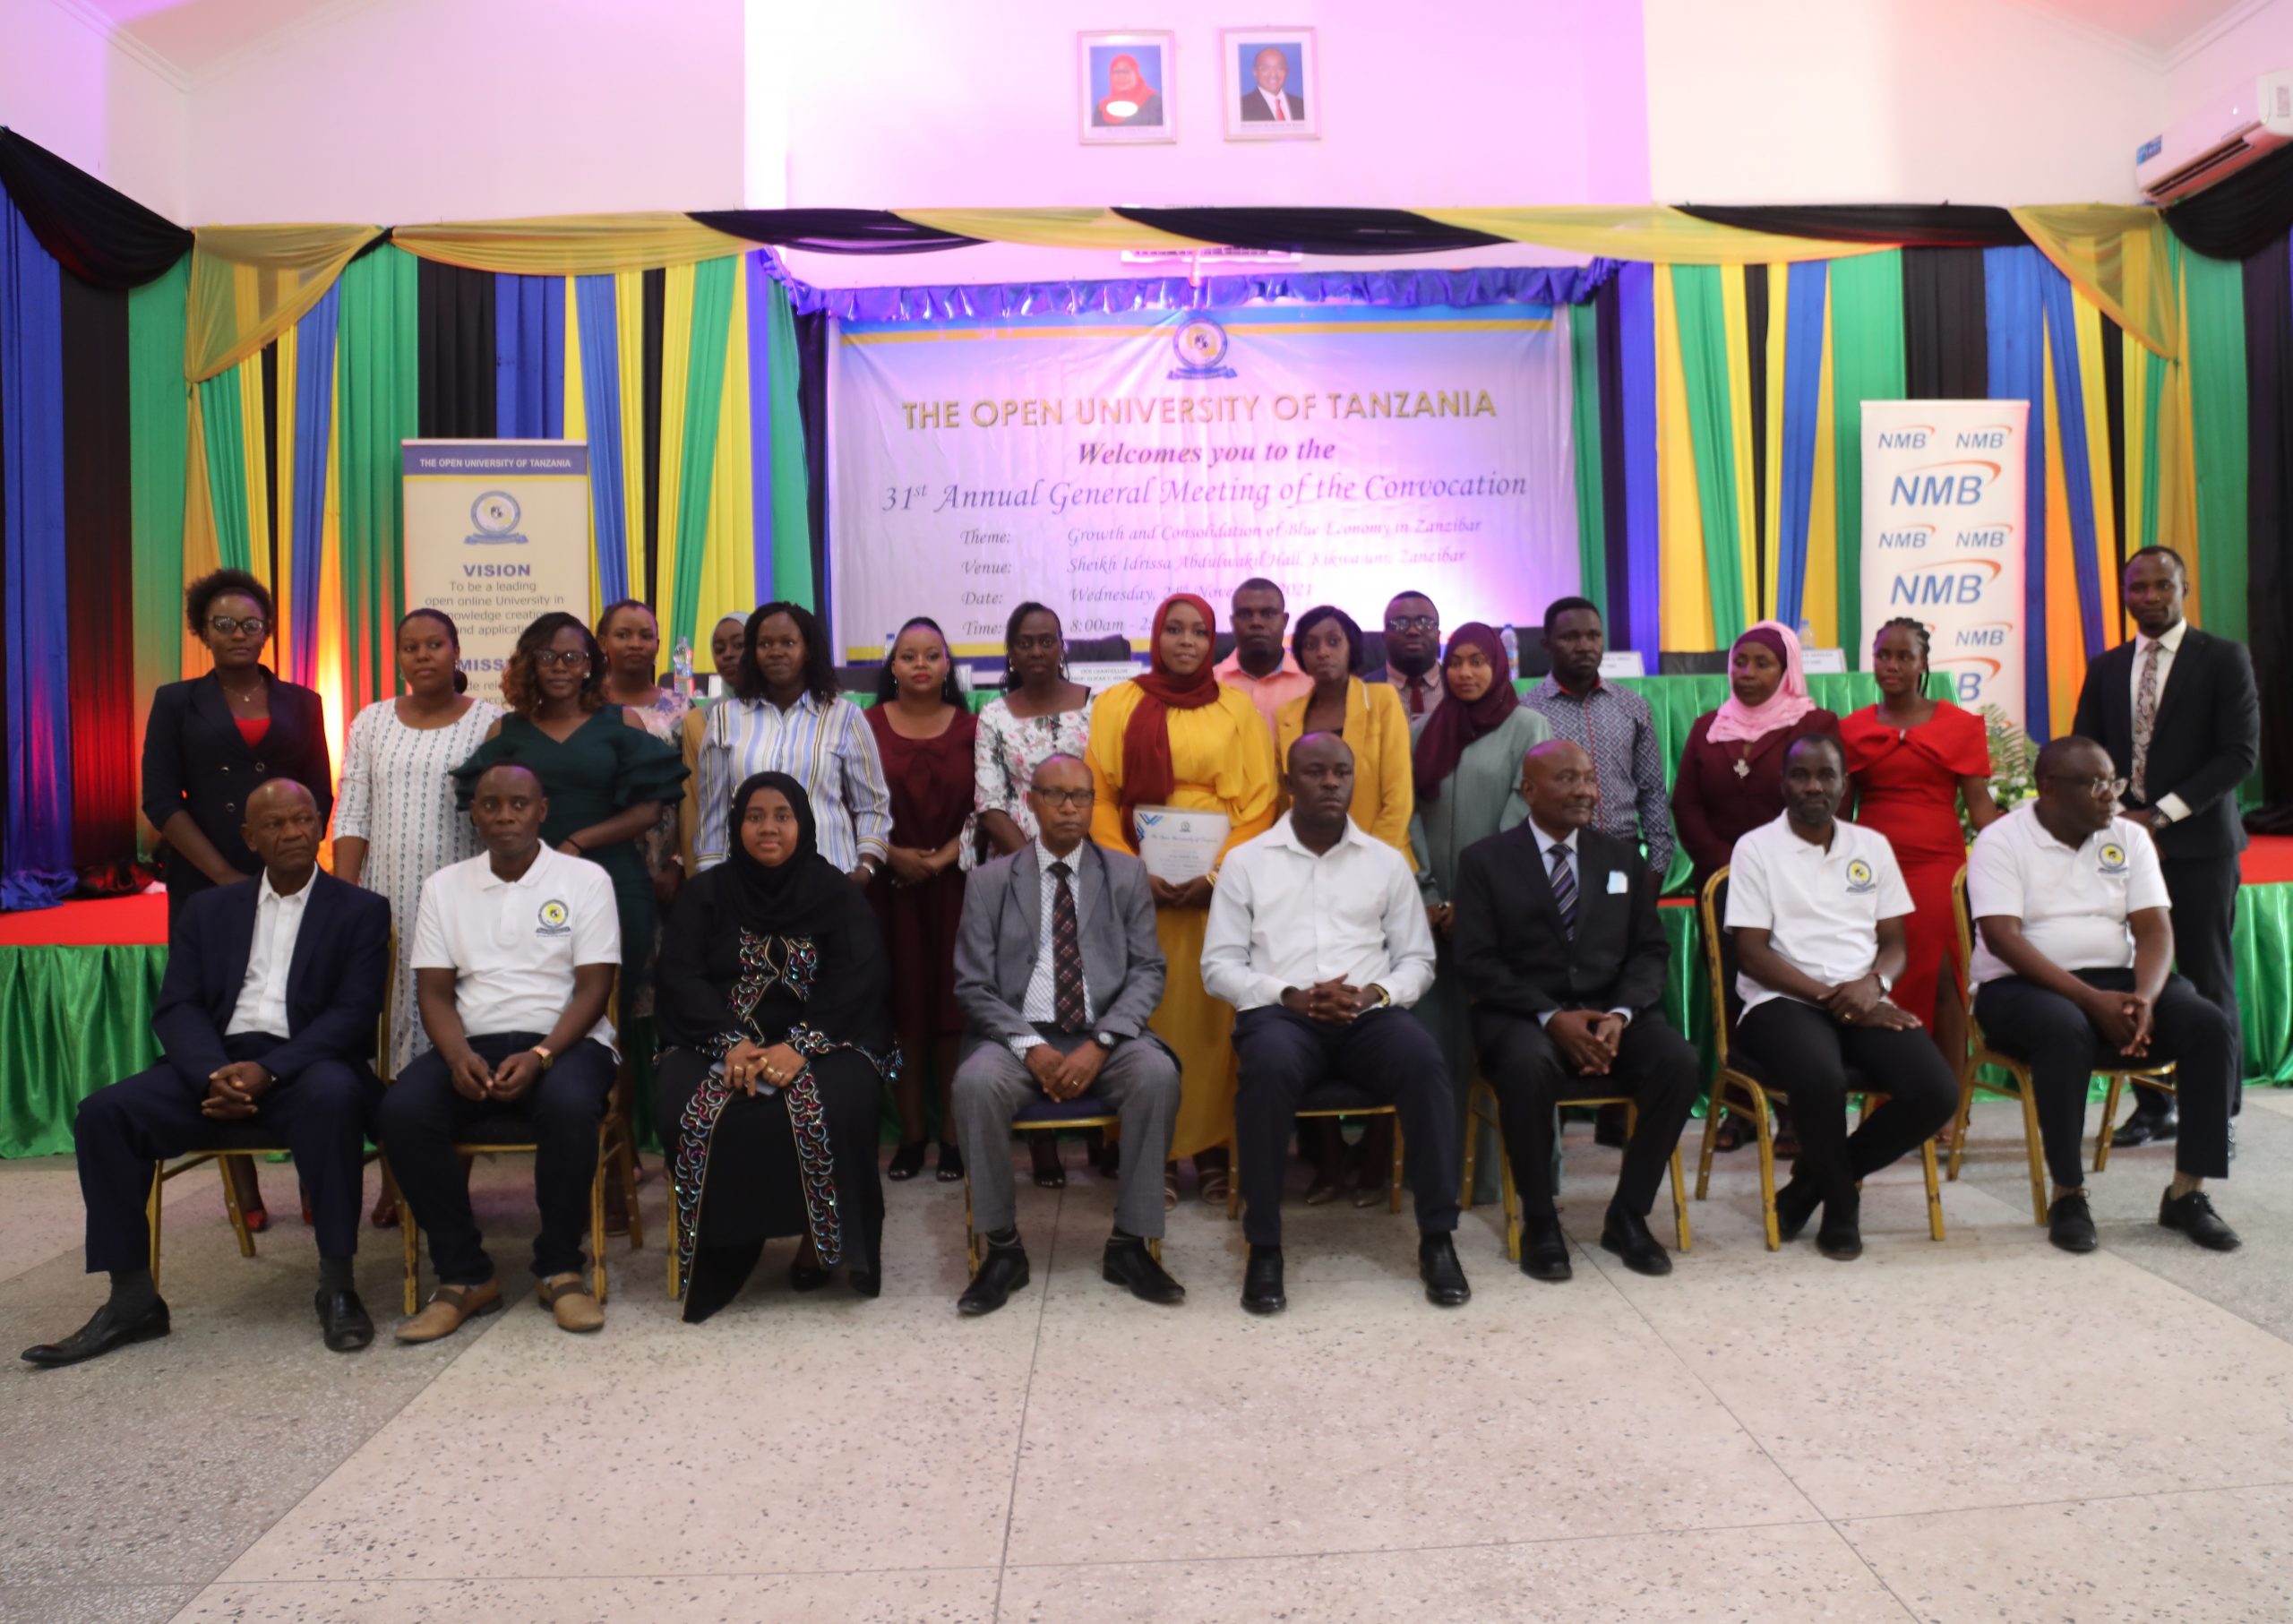 31st Annual General Meeting of the Convocation held in Zanzibar.